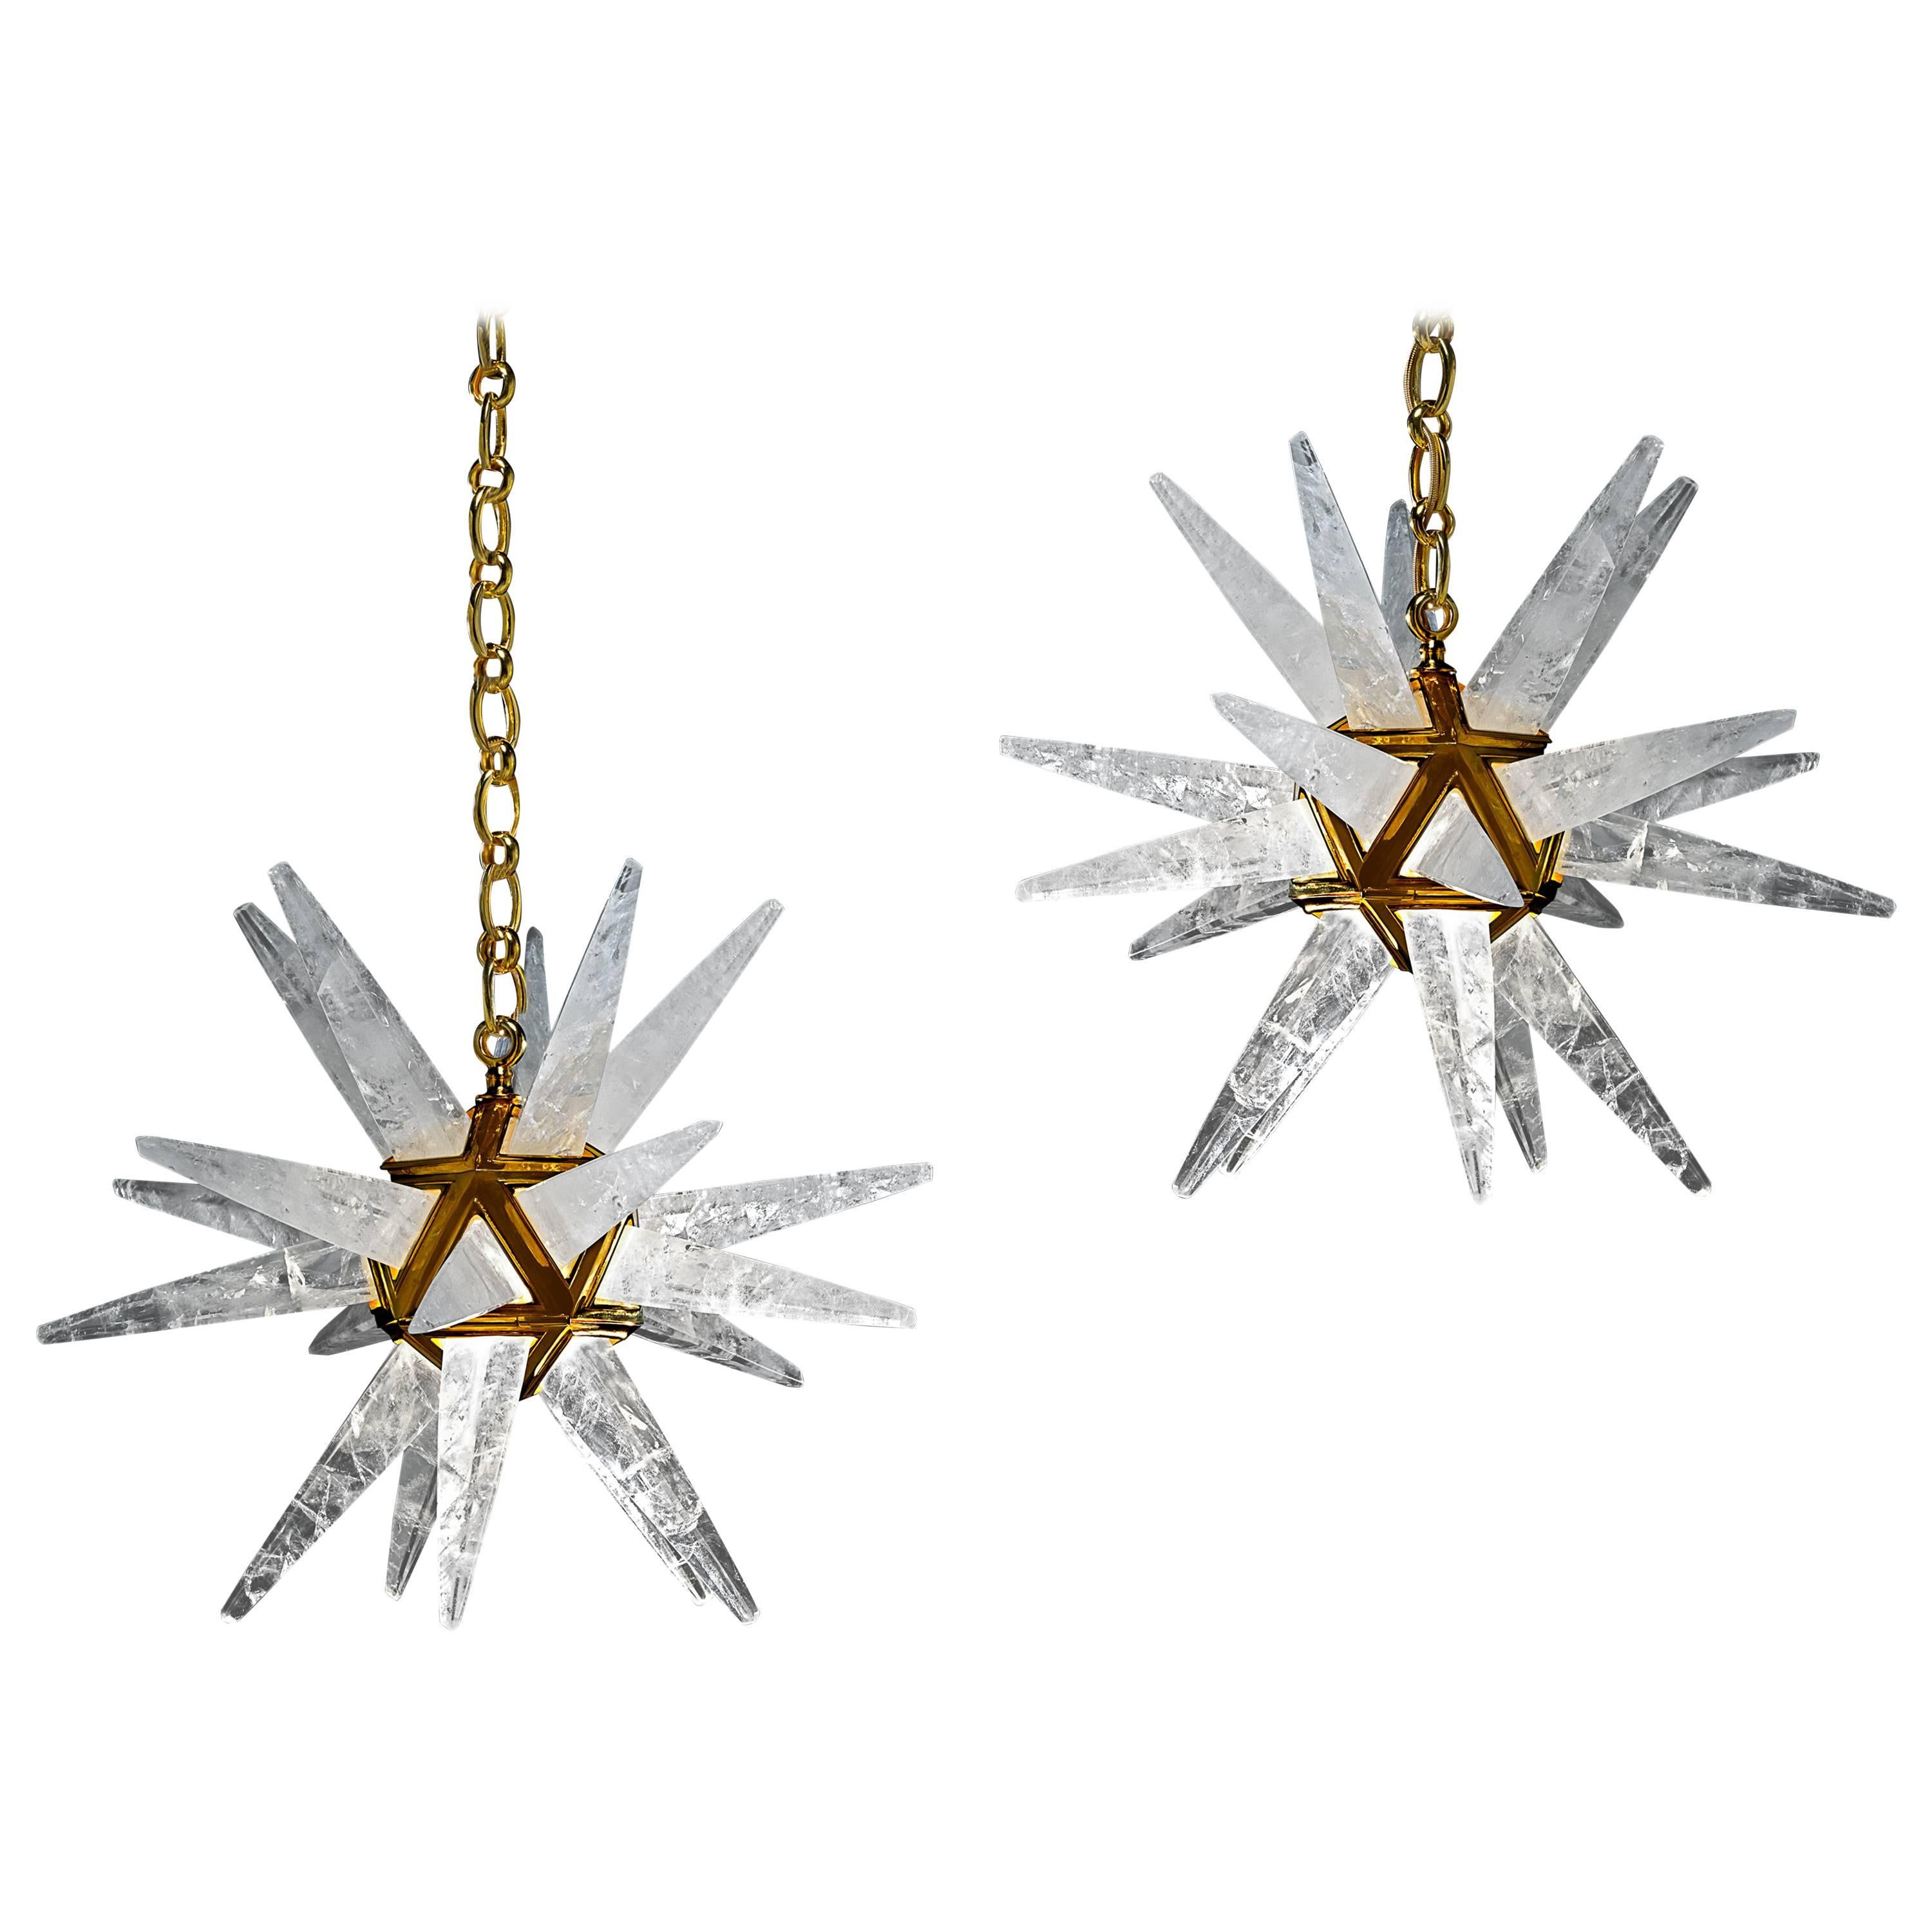 Pair of Rock Crystal Star Chandeliers by Alexandre Vossion